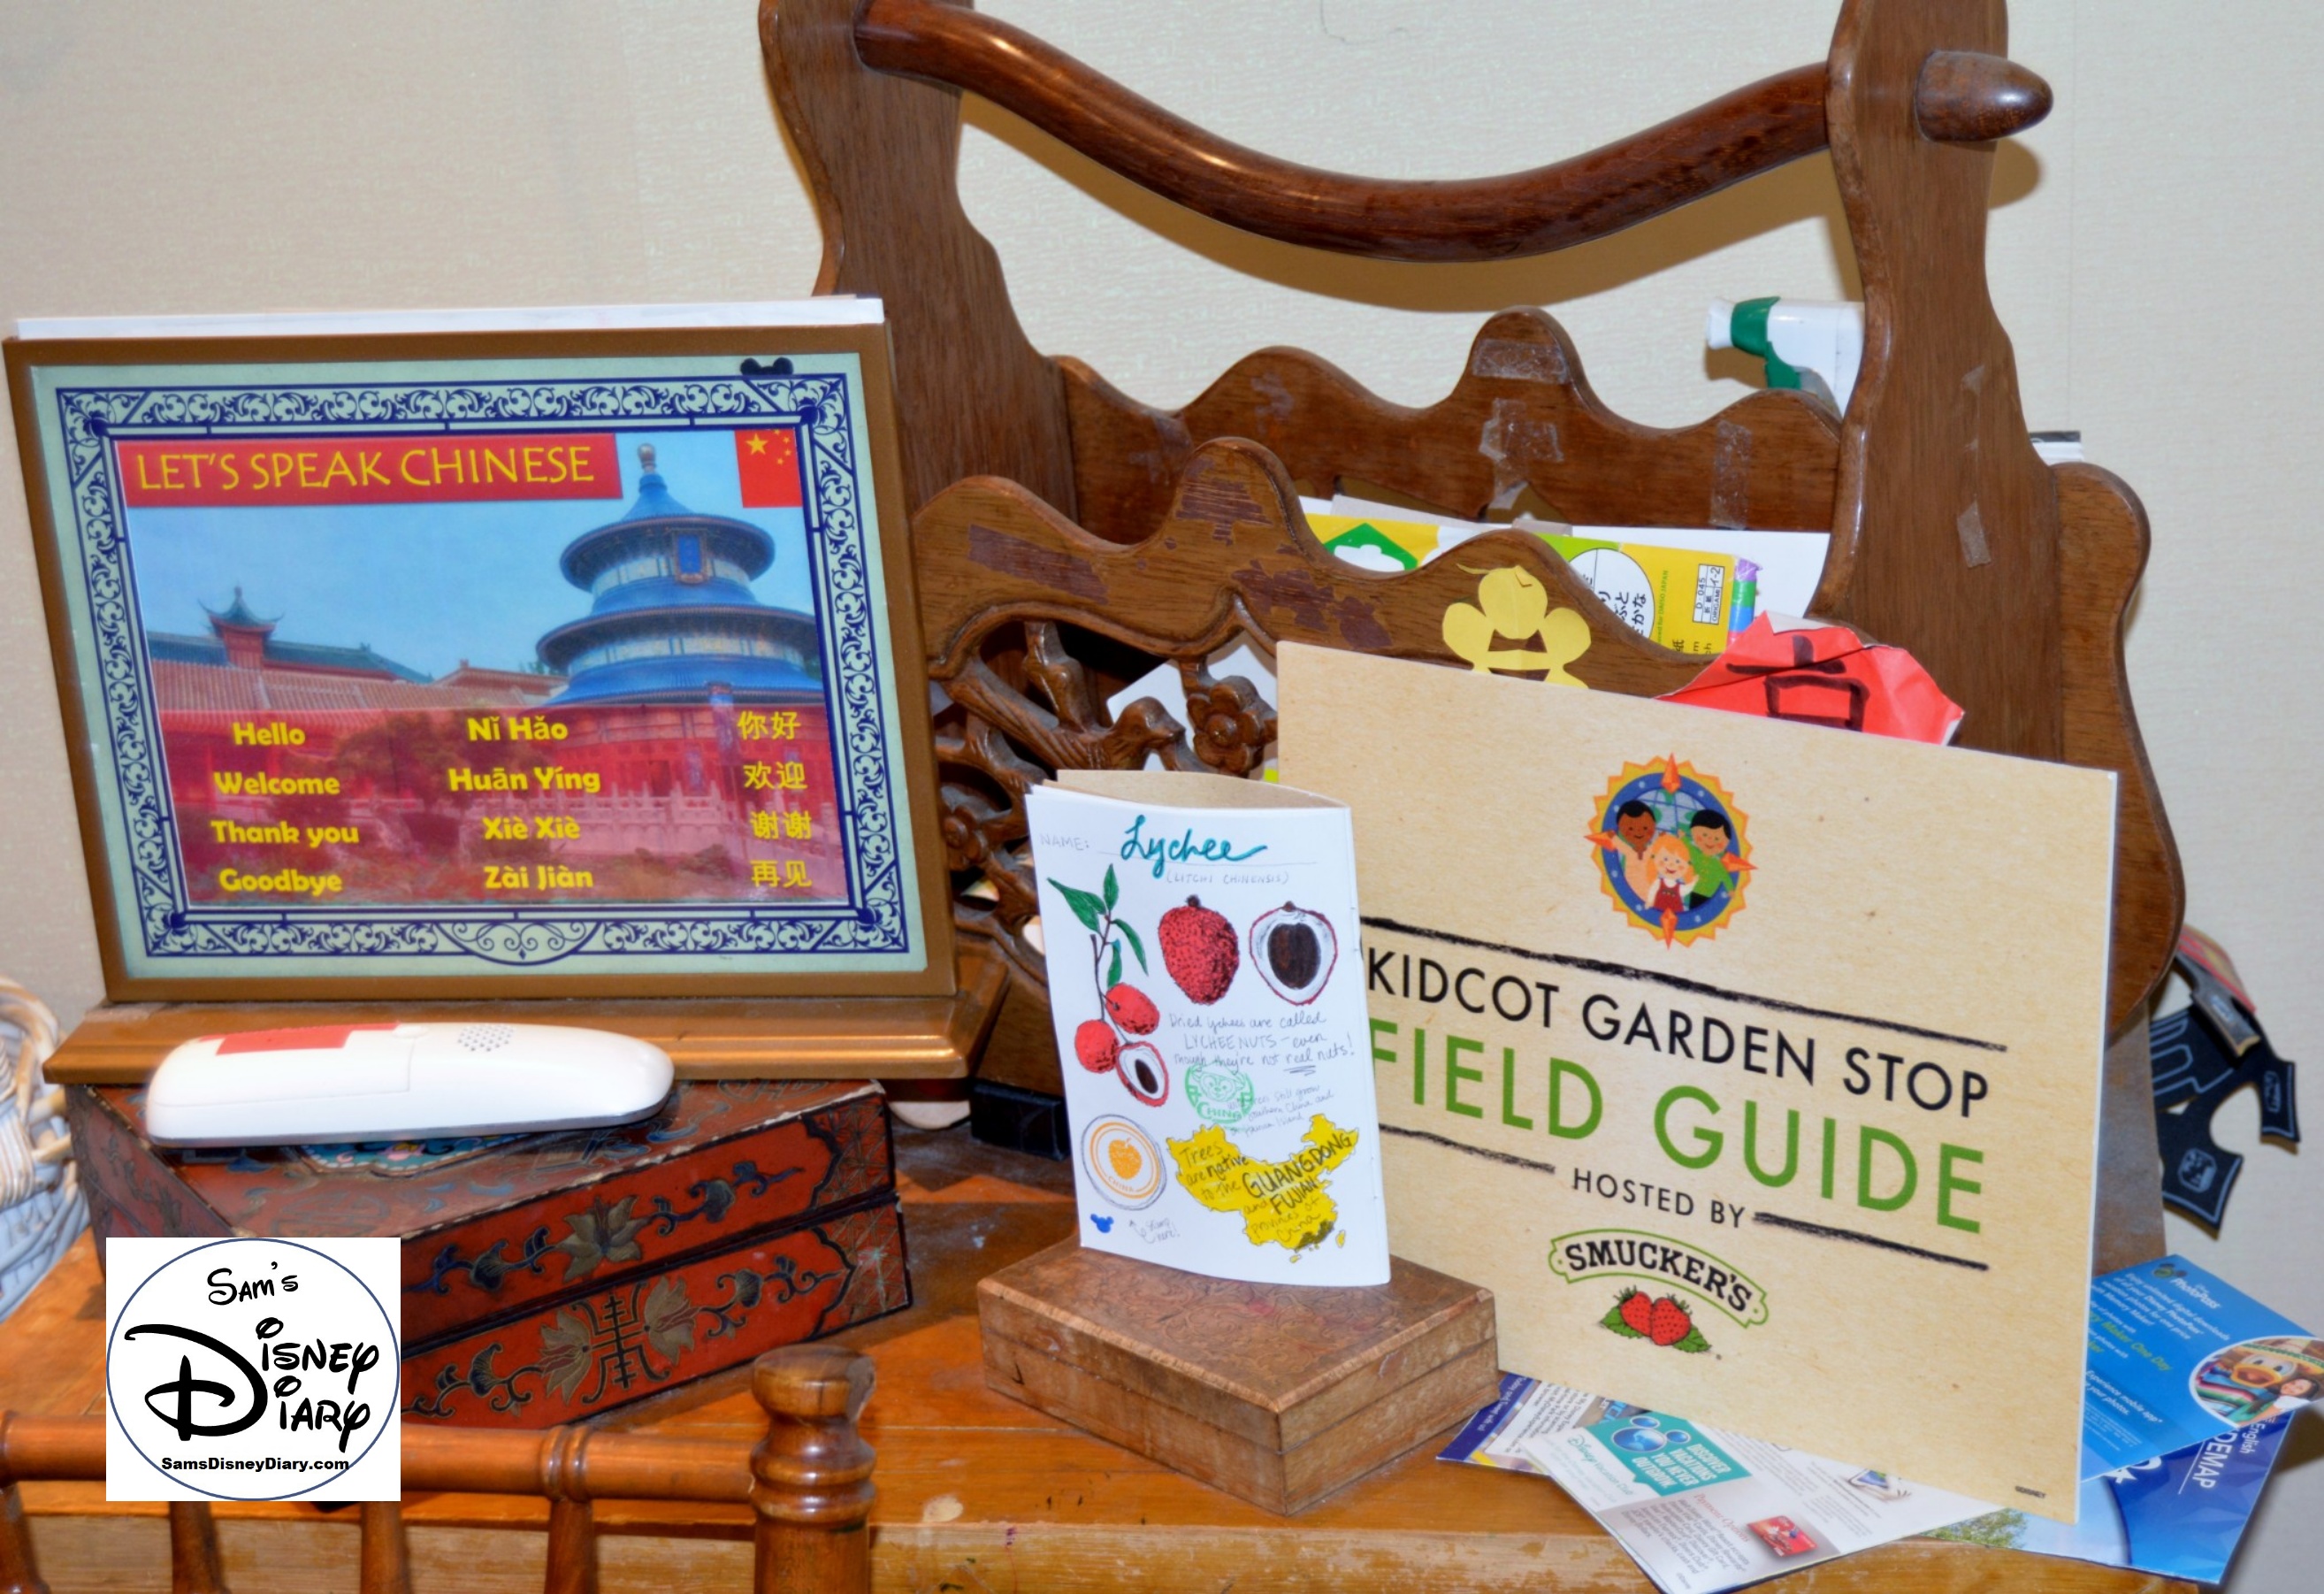 The 2017 Epcot International Flower and Garden Festival - Kidcot fun stops, rethemed as the KidCot Garden Stops, pick up your field guide.